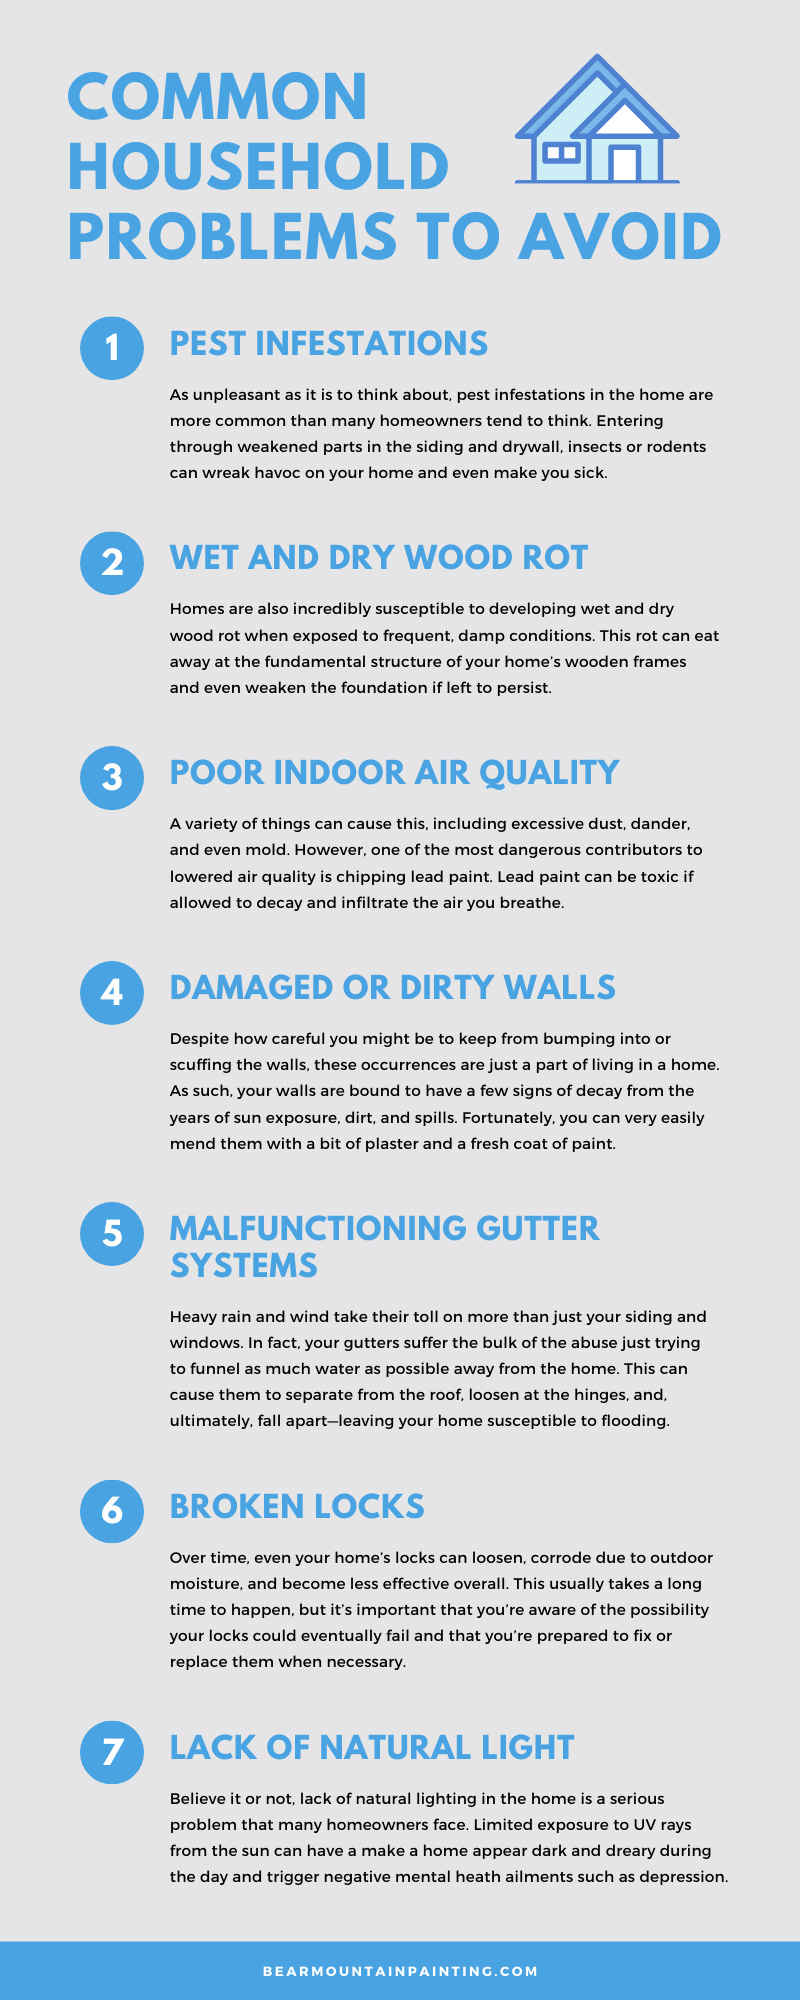 Common Household Problems to Avoid